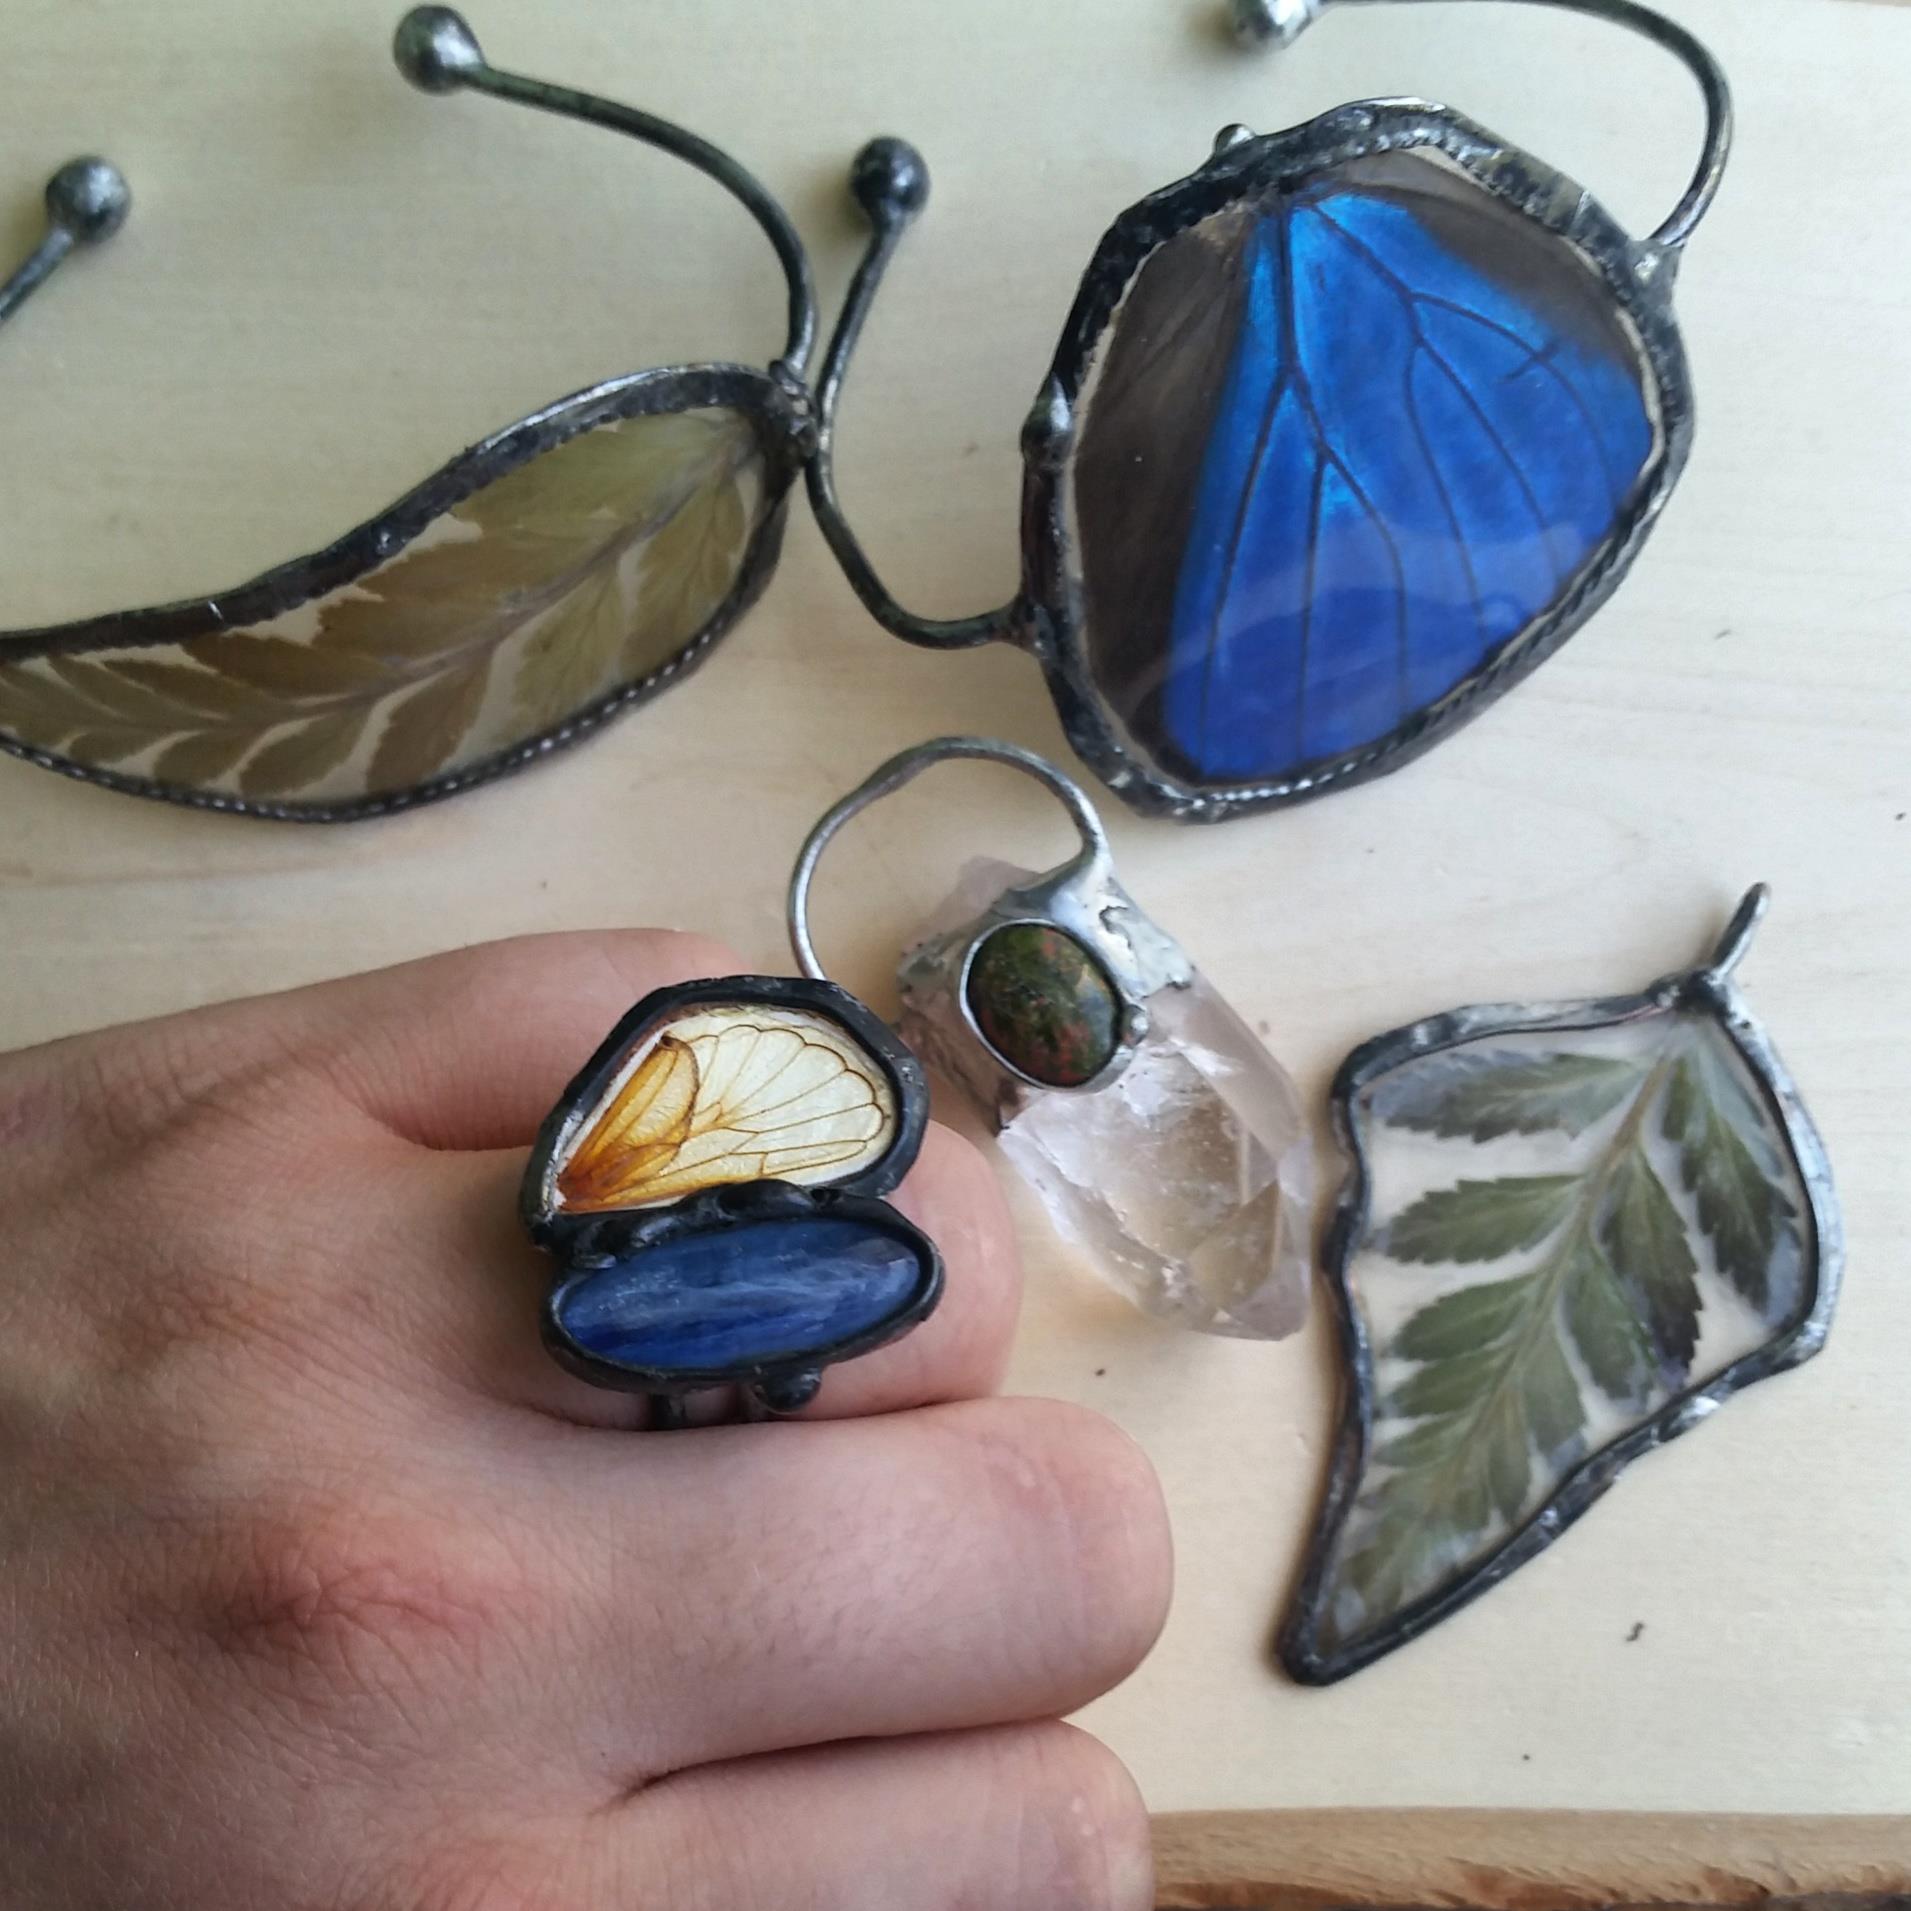    Fern Pendant &amp; Cuff, Blue Morpho Butterfly Wing Cuff, Cicada Hind Wing &amp; Blue Kyanite Ring    